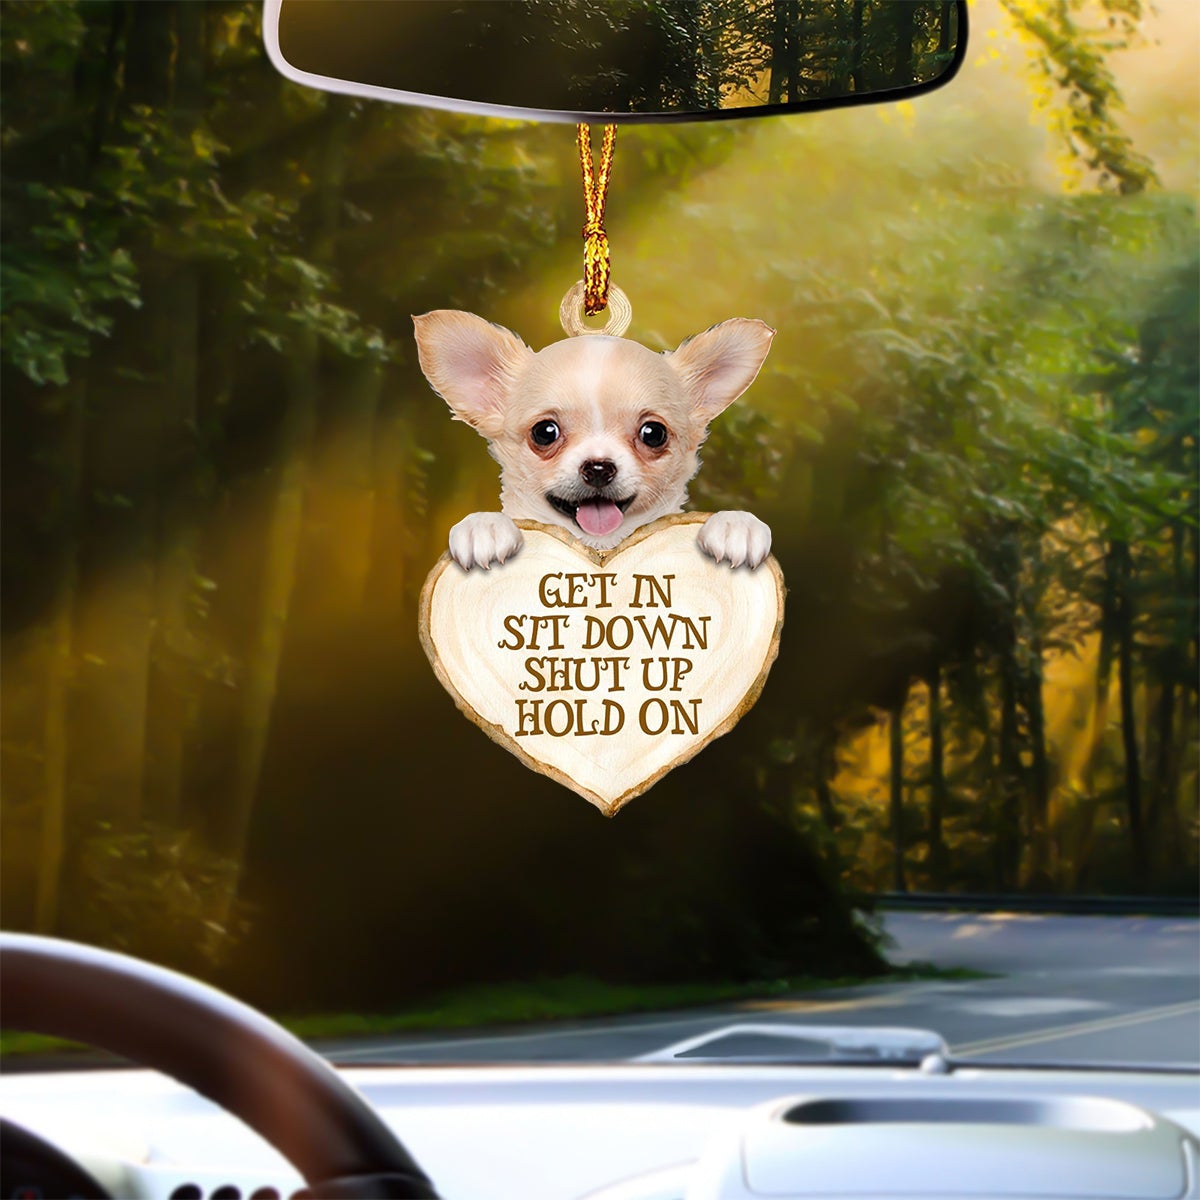 Chihuahua 3 Heart Shape Get In Car Hanging Ornament